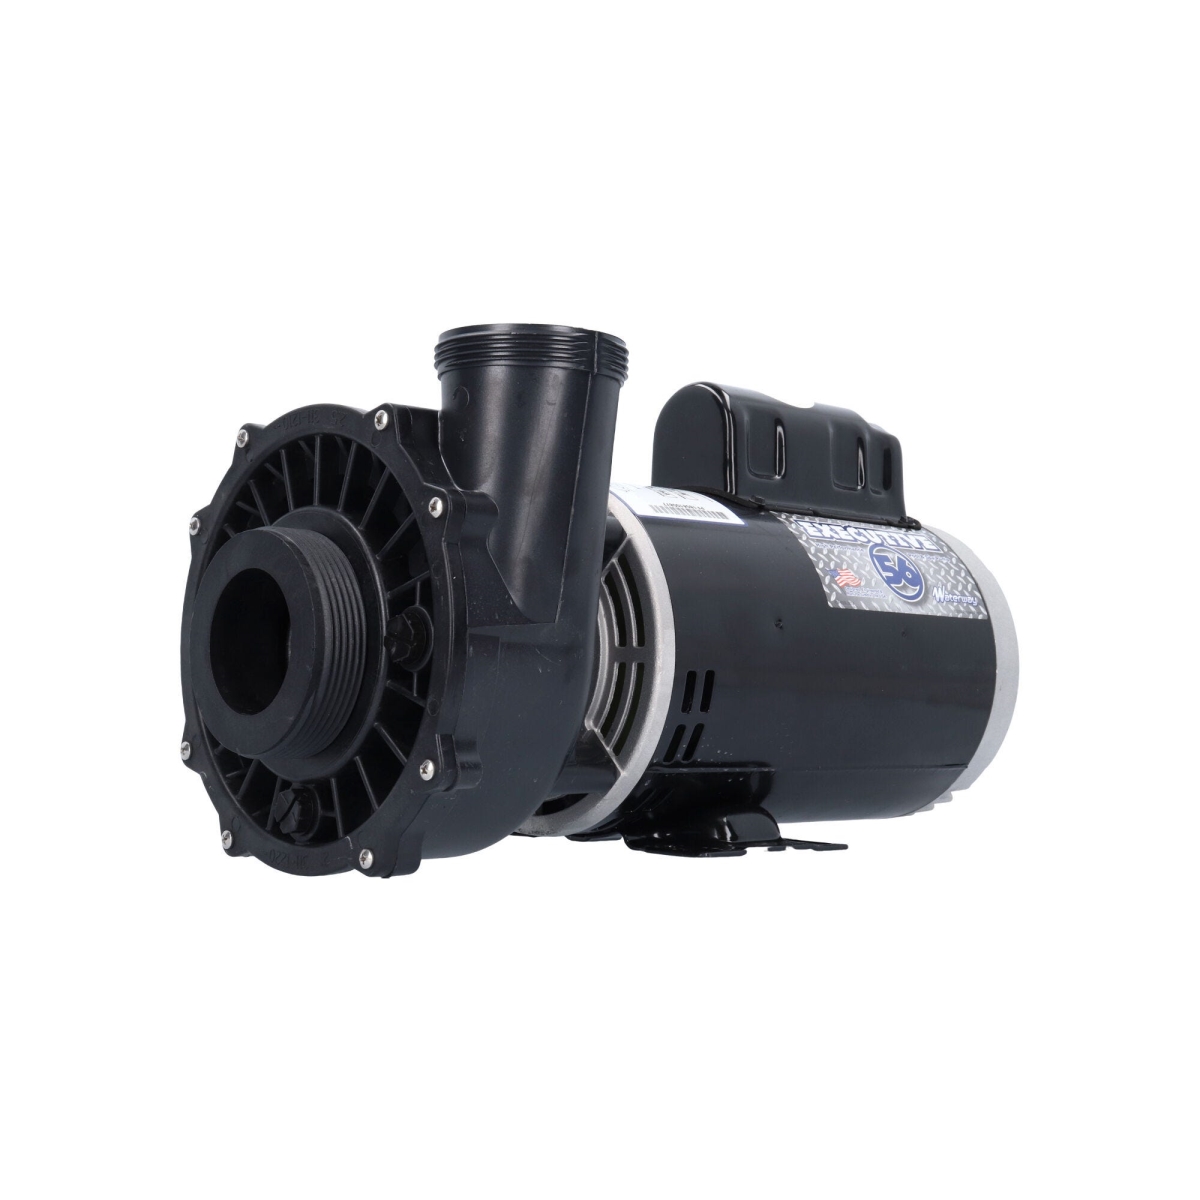 3721621-13 Executive 56 4 HP 230V 12.0-4.4A 2-Speed 2.5 x 2 in. MBT SD 56-Frame Pump -  WATERWAY PLASTICS